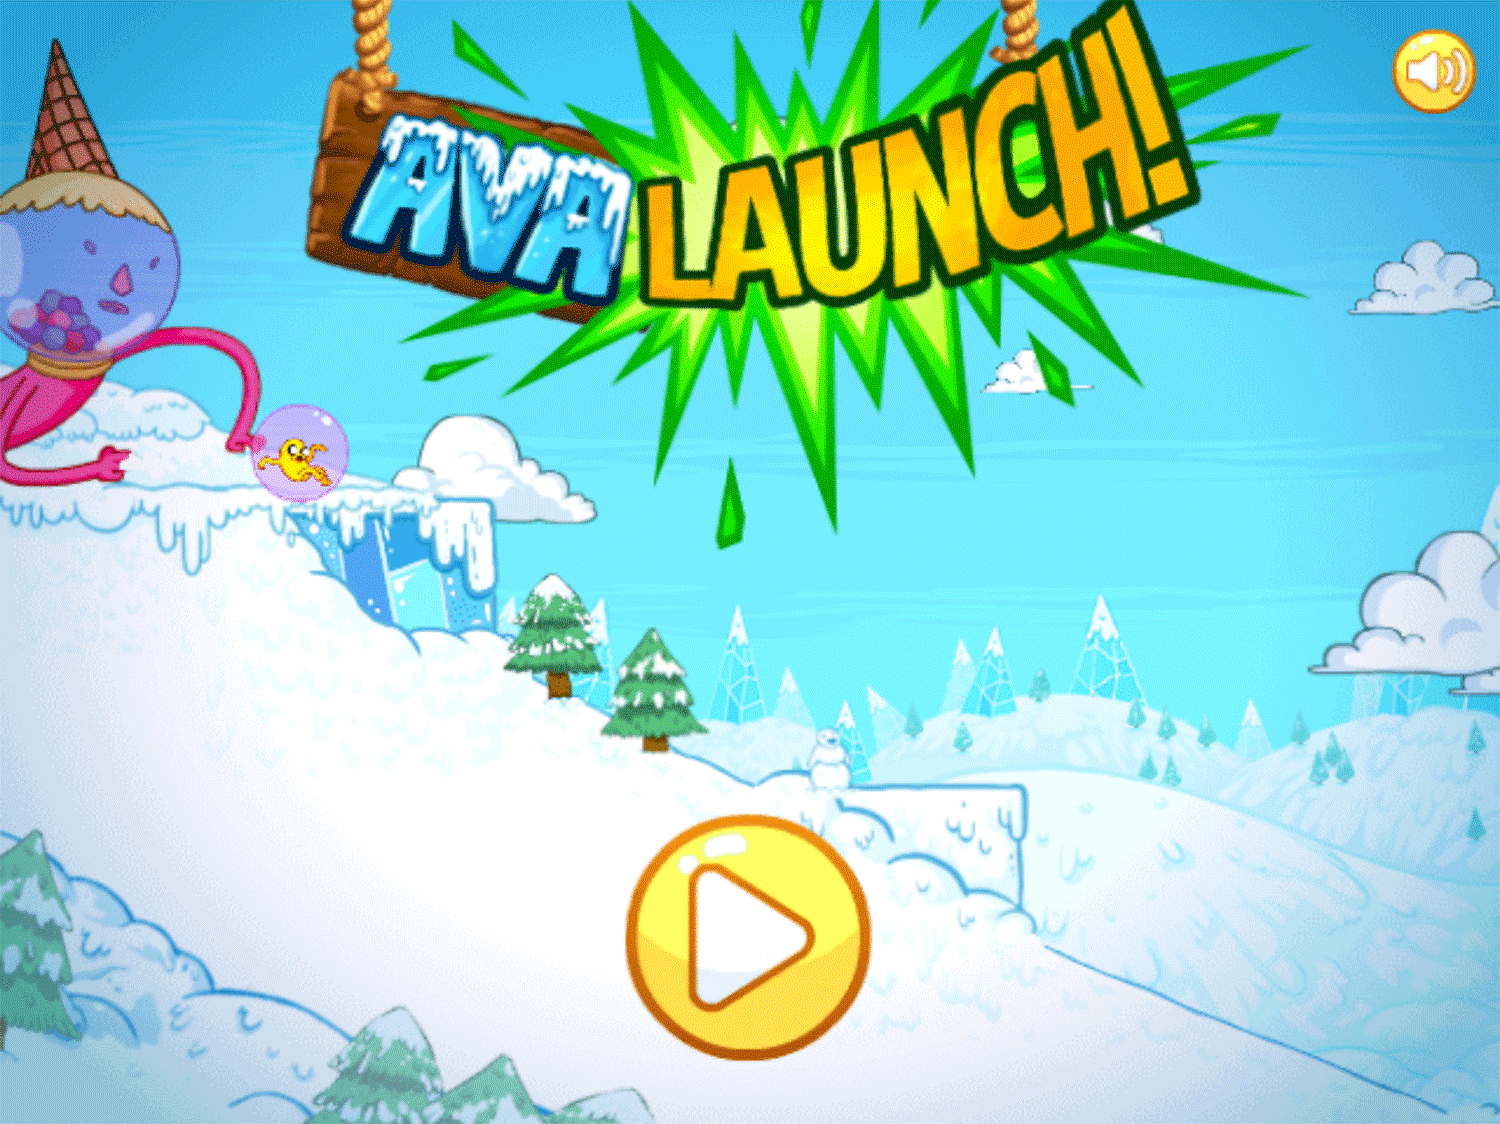 Adventure Time AvaLaunch Game Welcome Screen Screenshot.